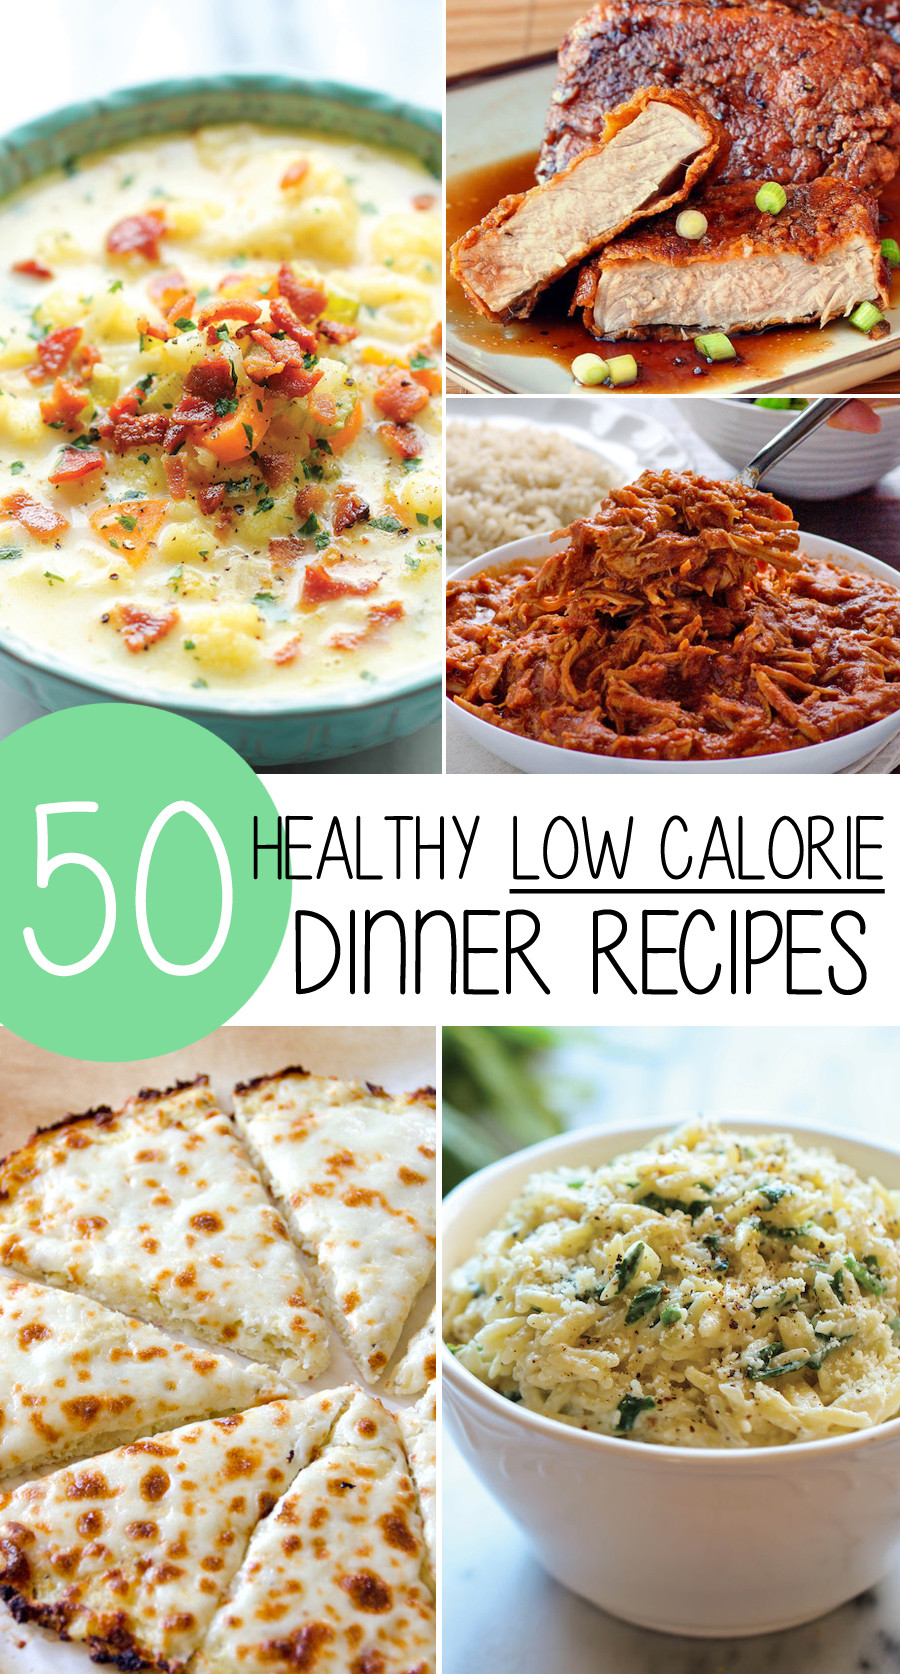 Healthy Diet Recipes For Weight Loss
 50 Healthy Low Calorie Weight Loss Dinner Recipes